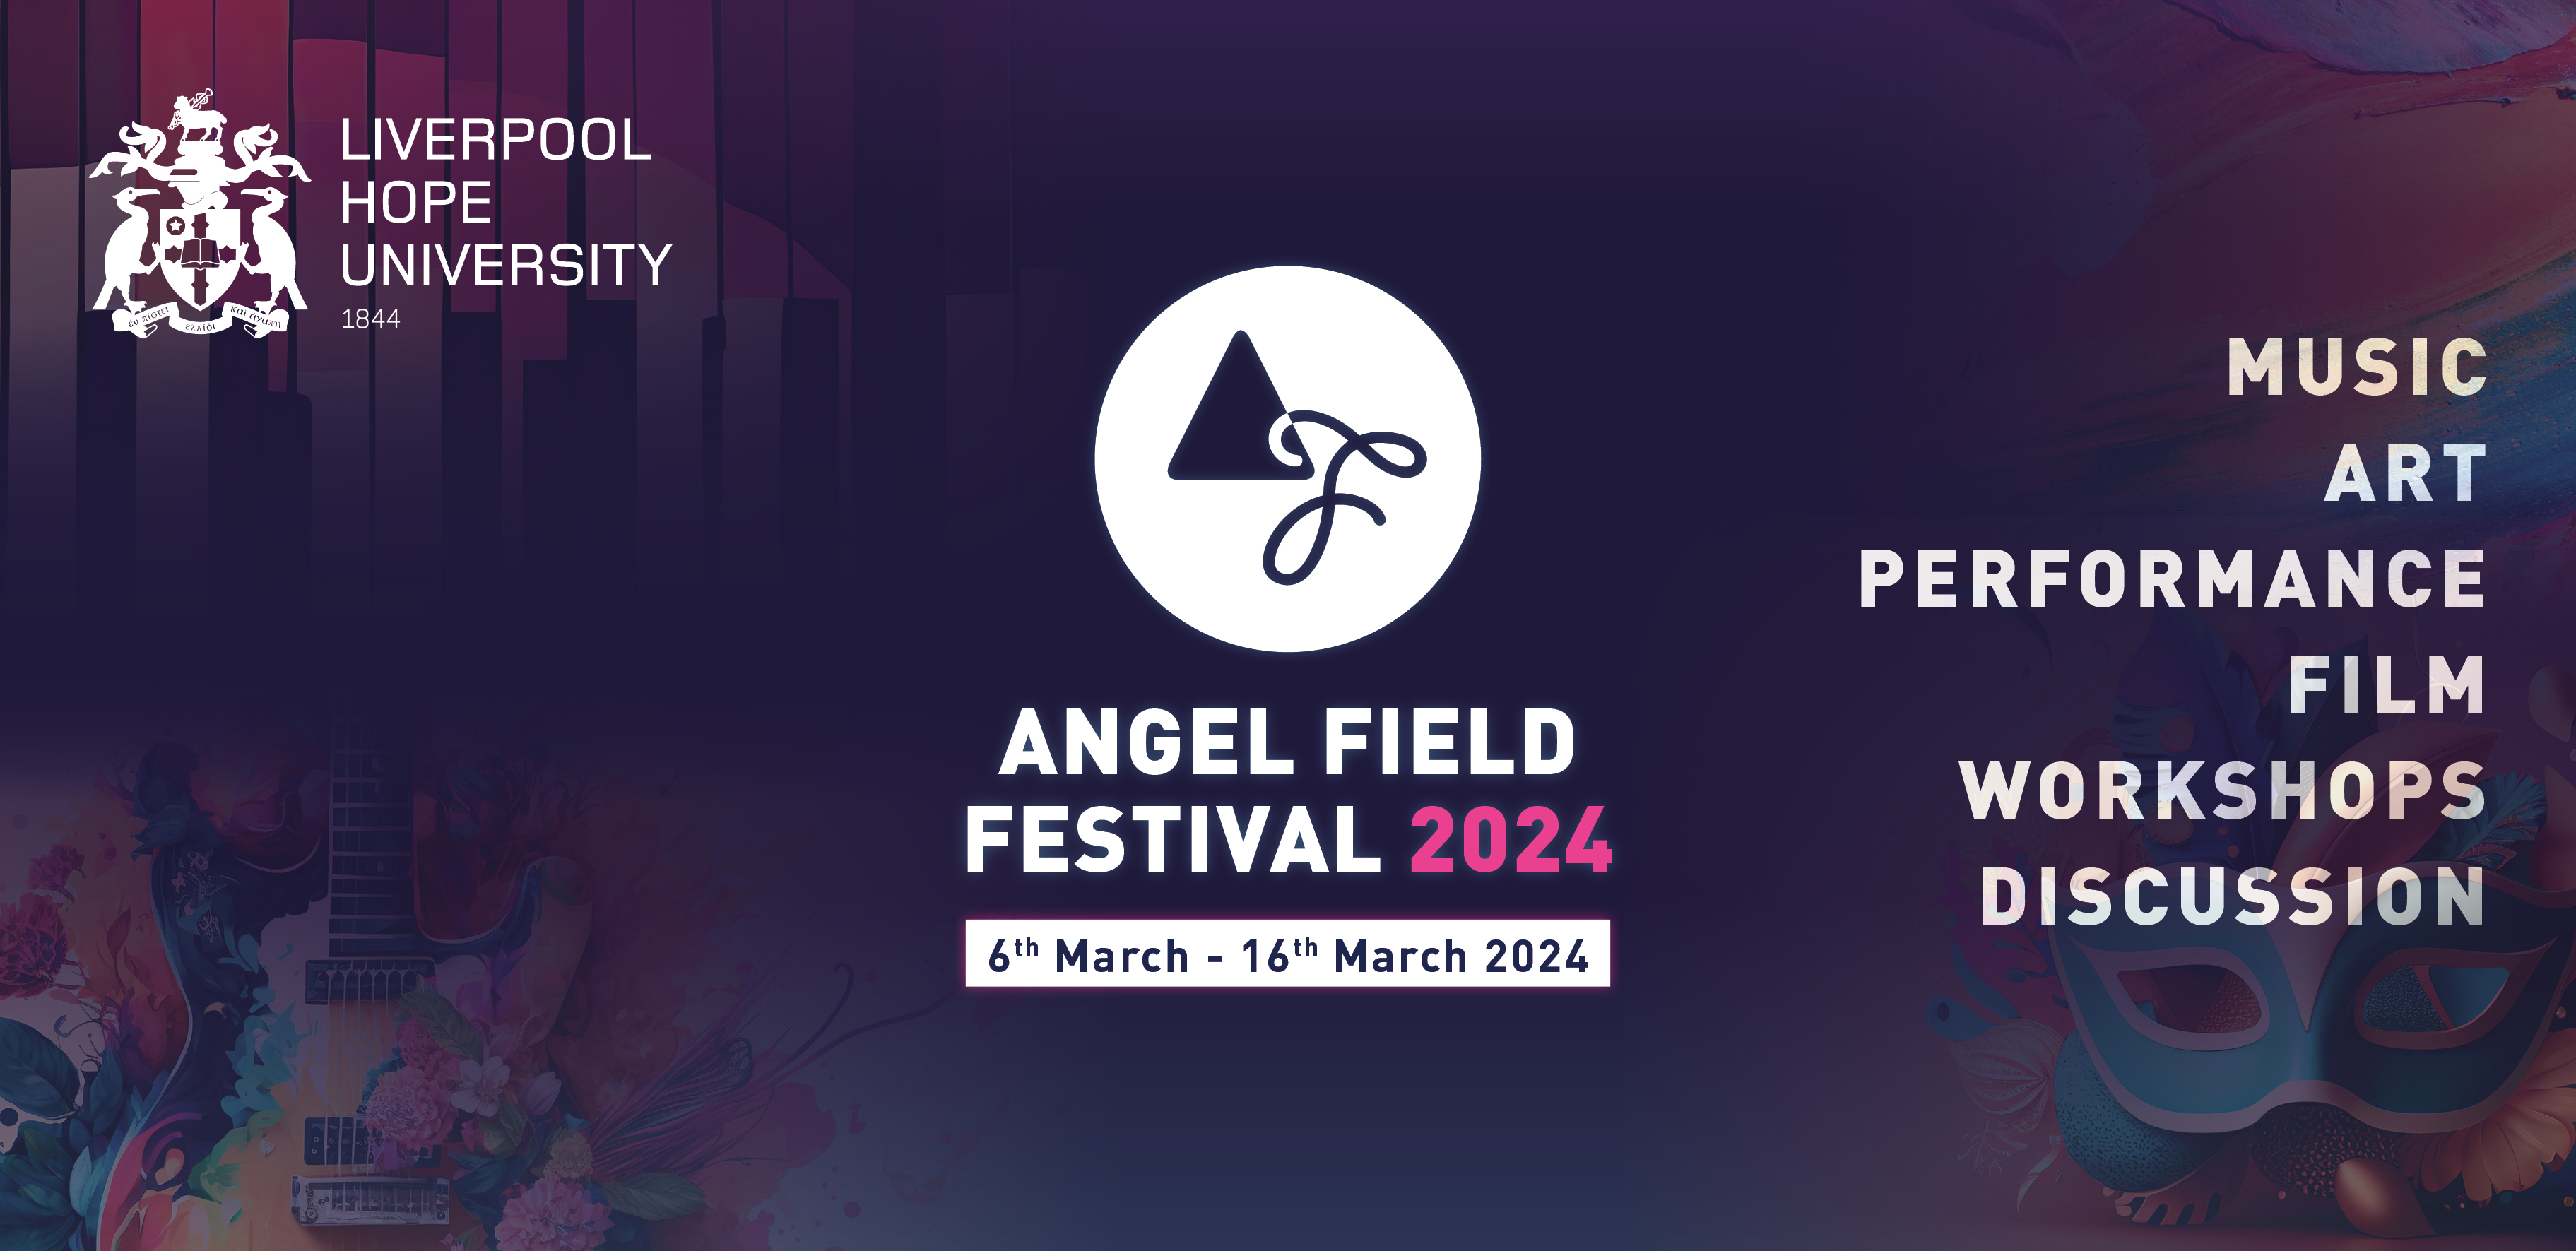 A purple graphic with the Angel Field Festival words and logo in the centre.